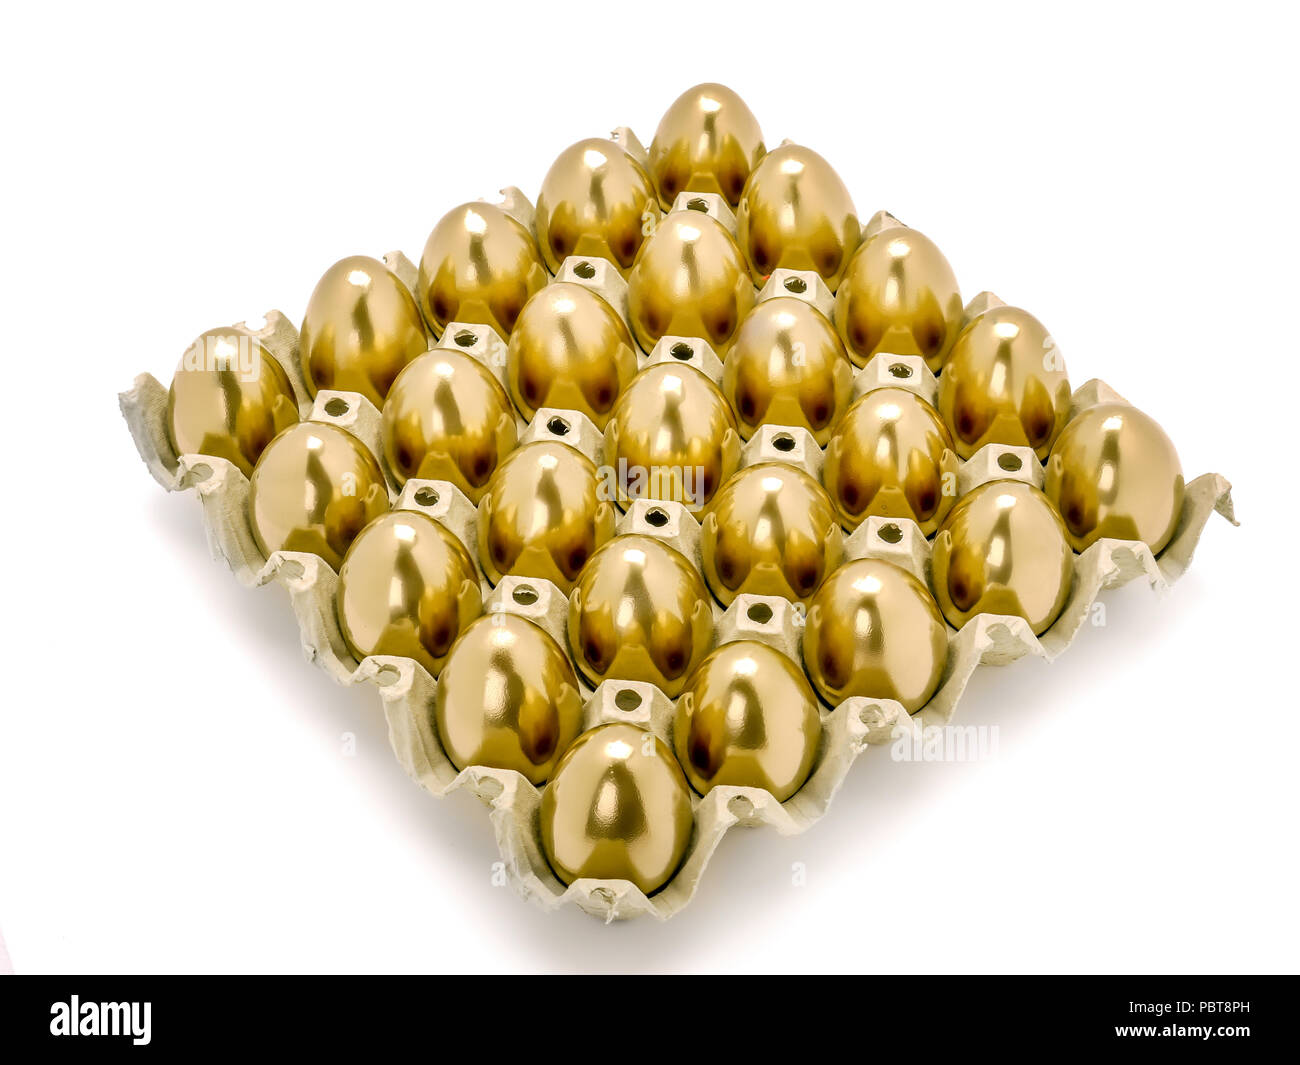 Bunch of golden eggs in egg tray shot on white background Stock Photo